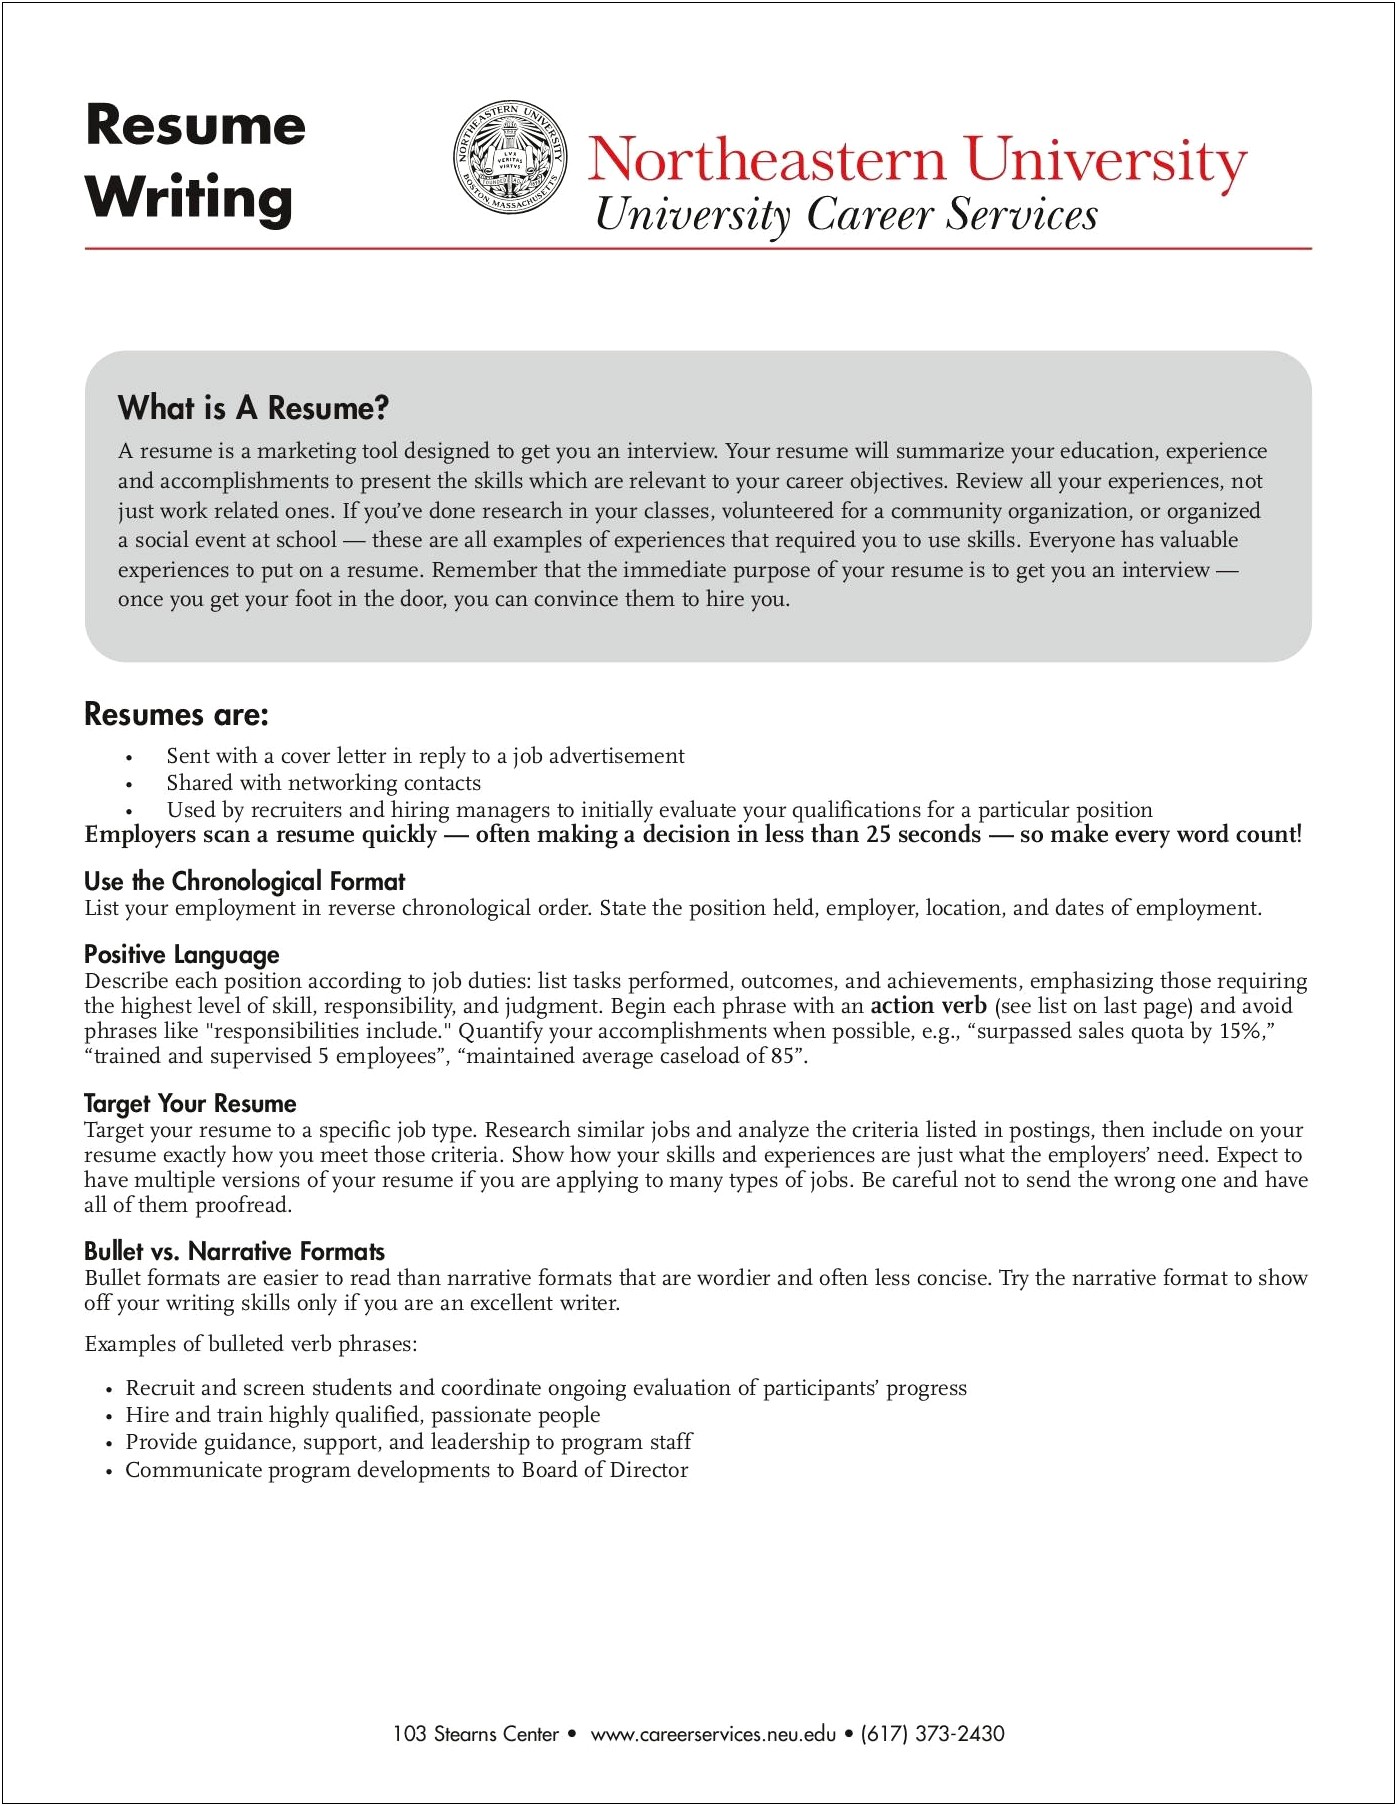 Targeting Your Resume For A Specific Job